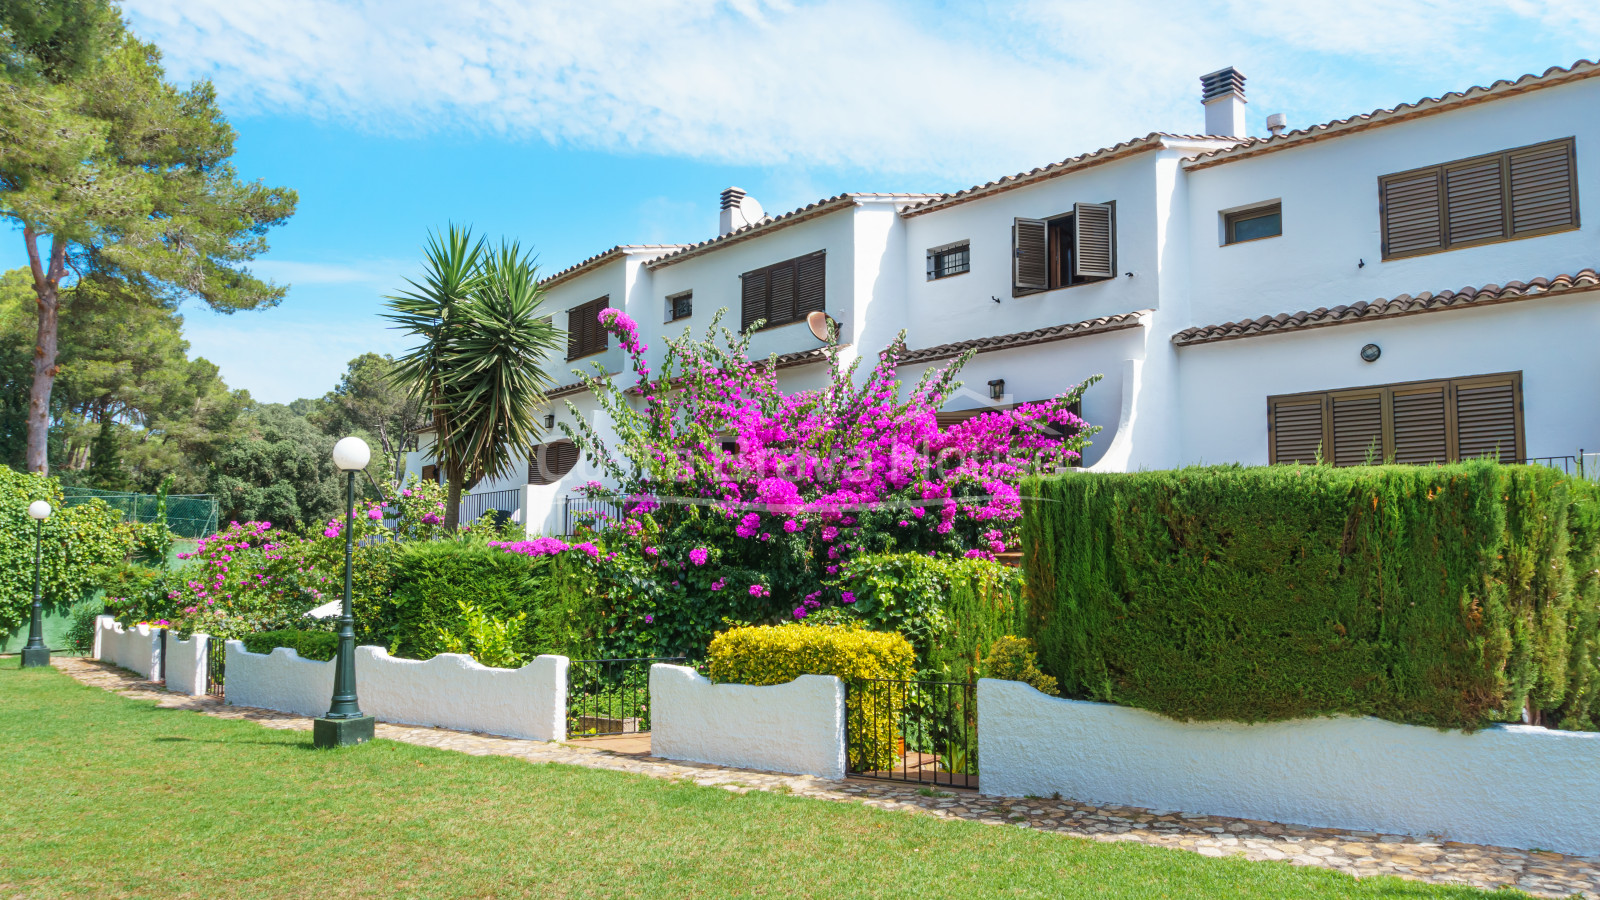 Semi-detached house 400 m from the beach in Tamariu, with communal garden, pool and garage